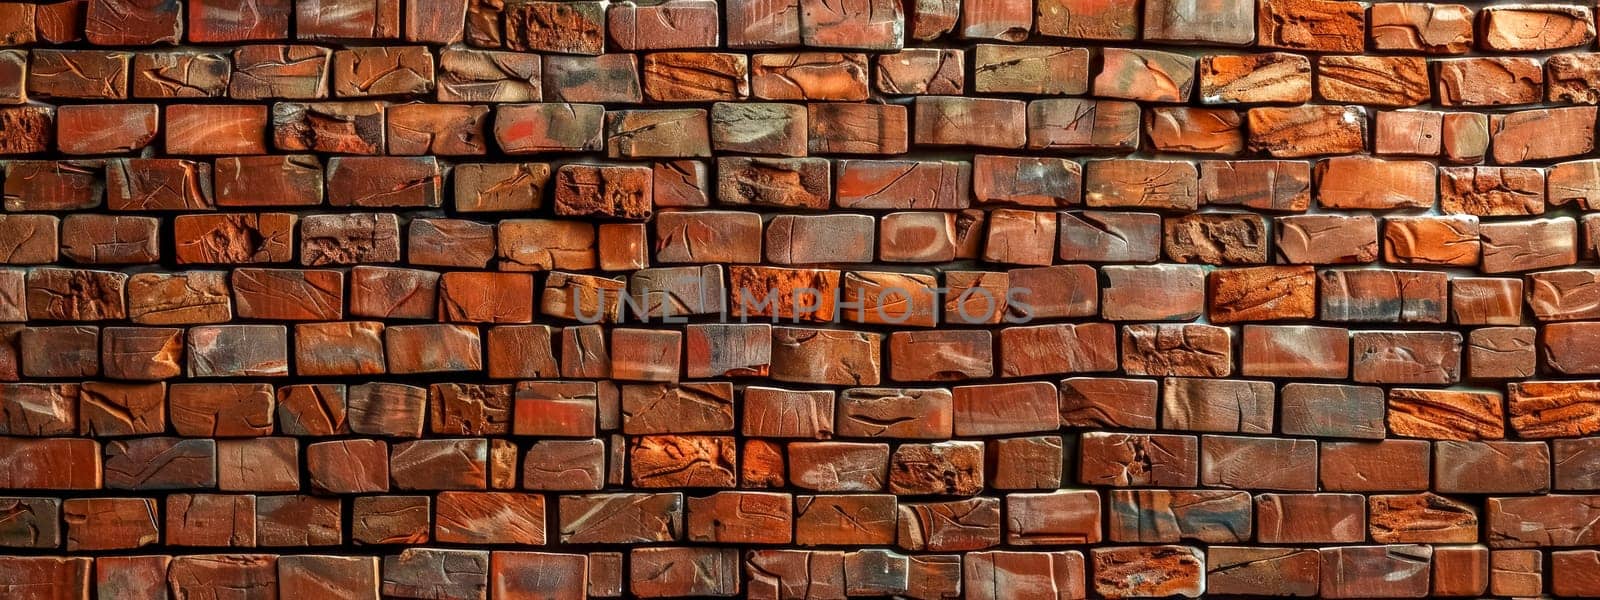 High-resolution image capturing the details of a weathered red brick wall